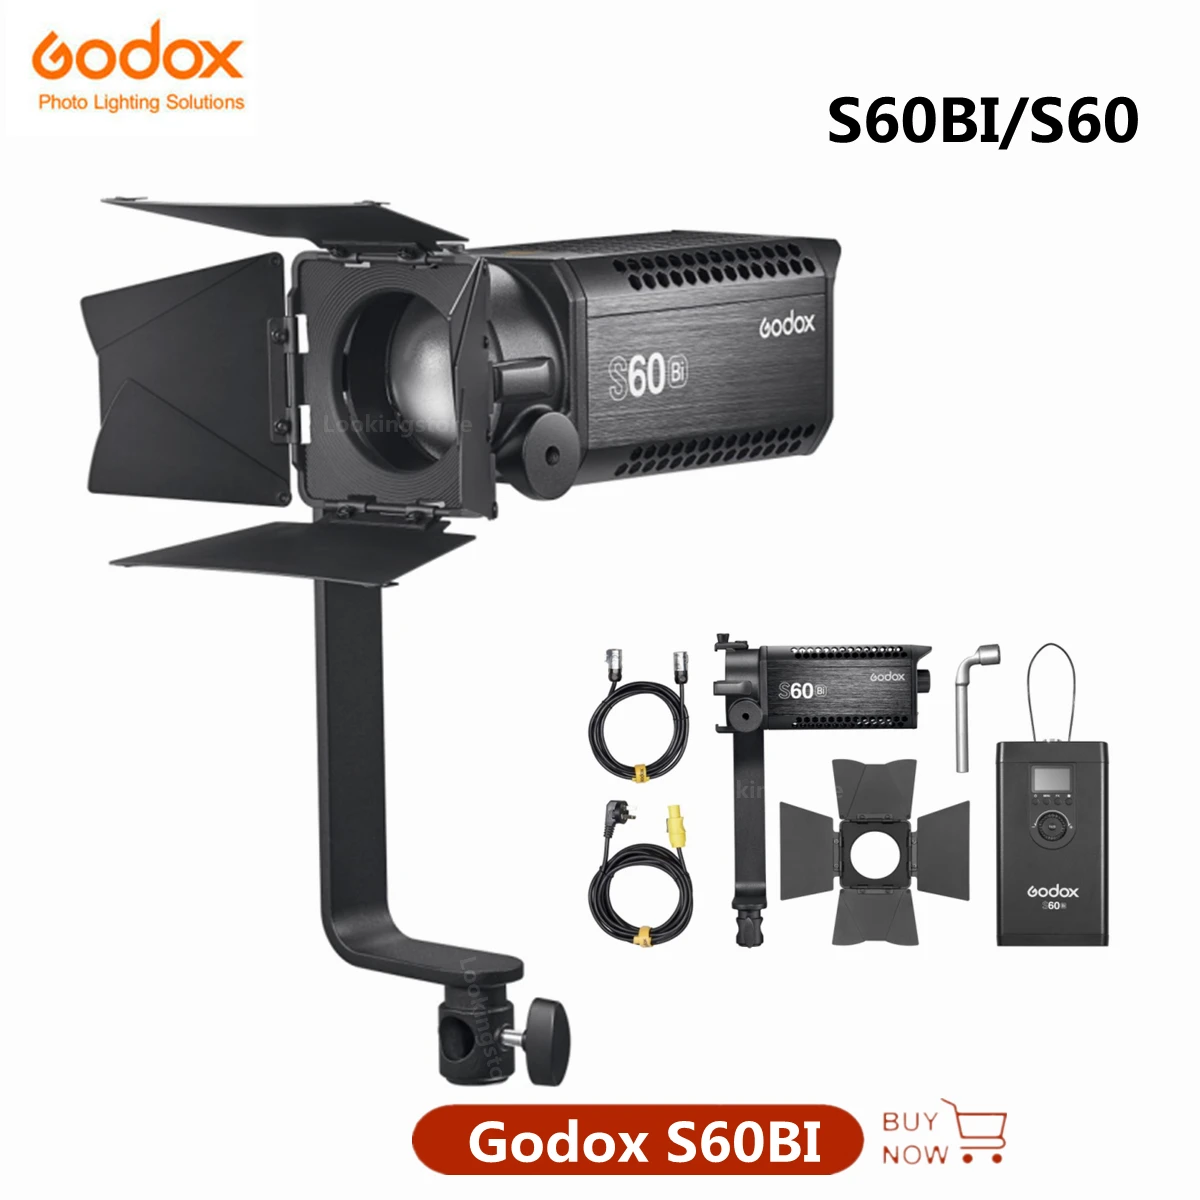 

Godox S60 S60BI 60W Focusing LED Photography Continuous adjustable Light Spotlight With Barn Door for Professional Photography